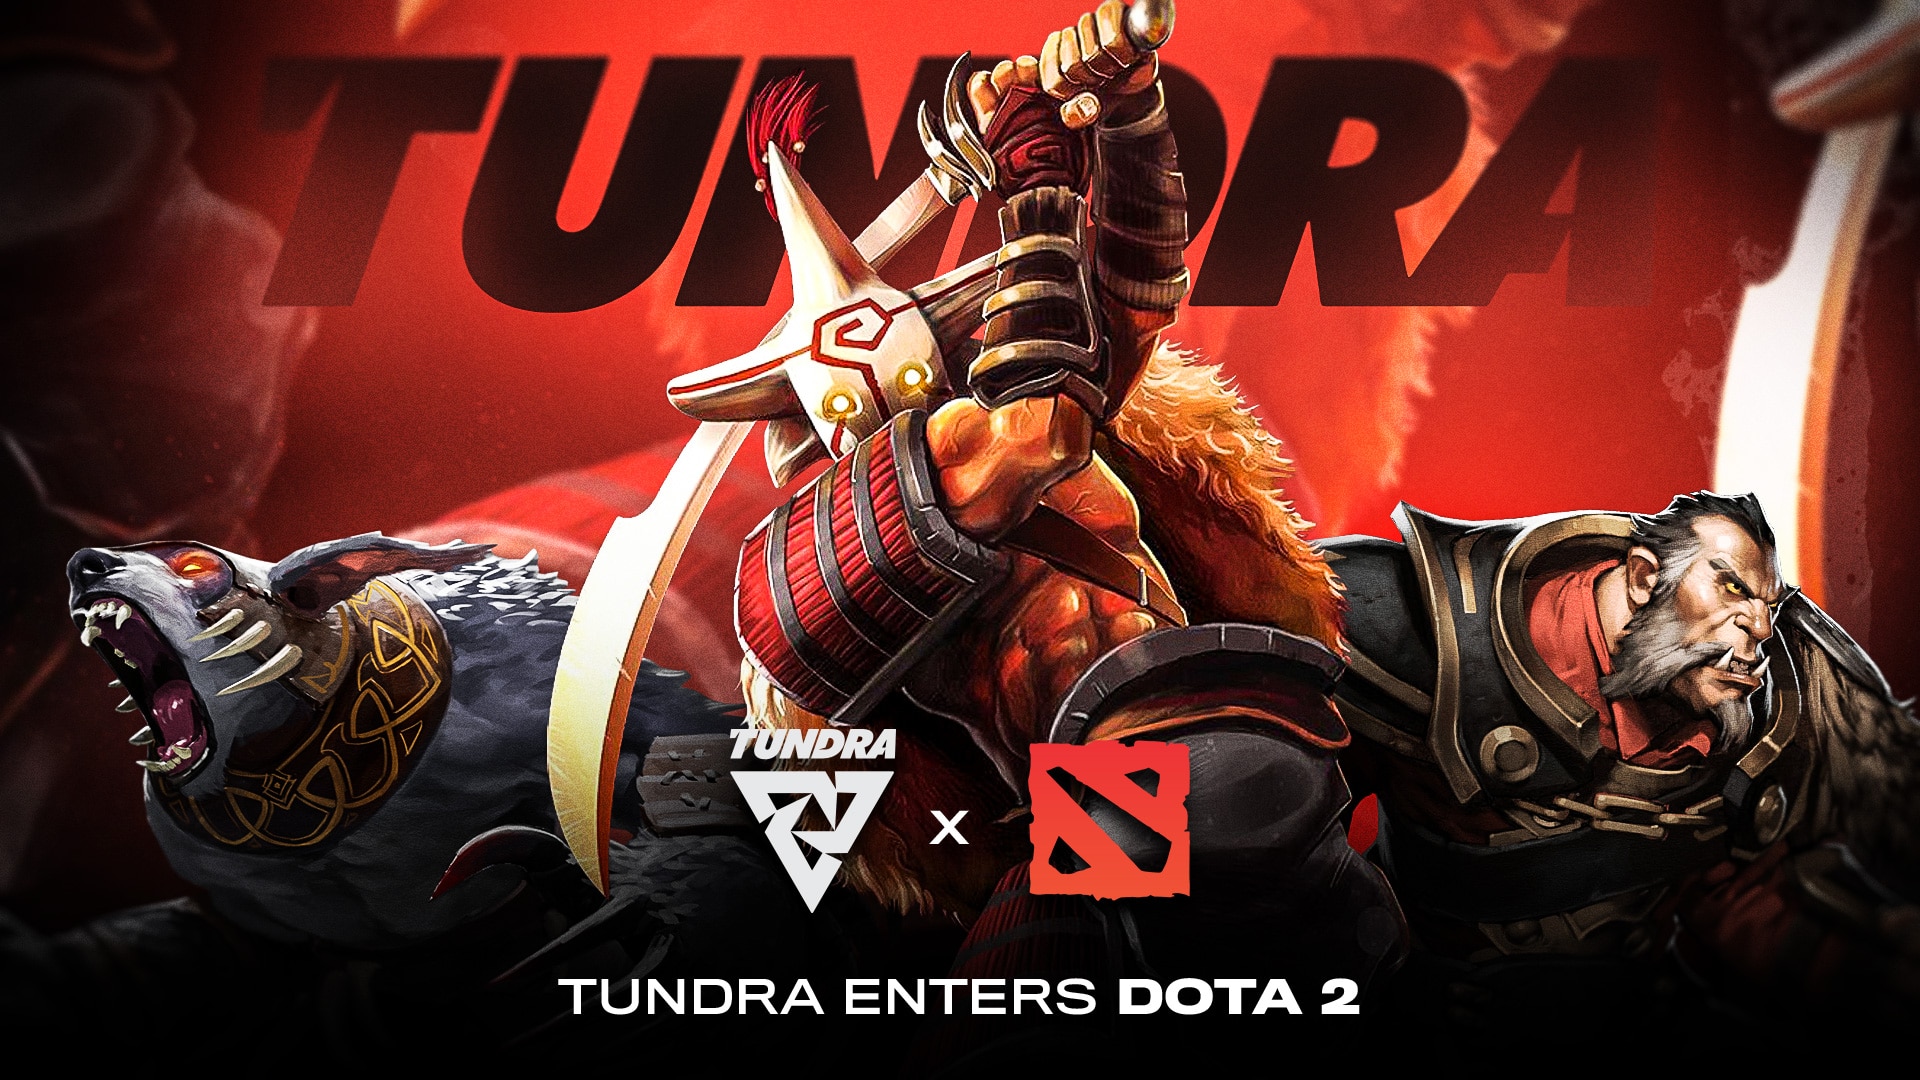 UK-based org Tundra move into Dota 2 after signing team taking part in DreamLeague